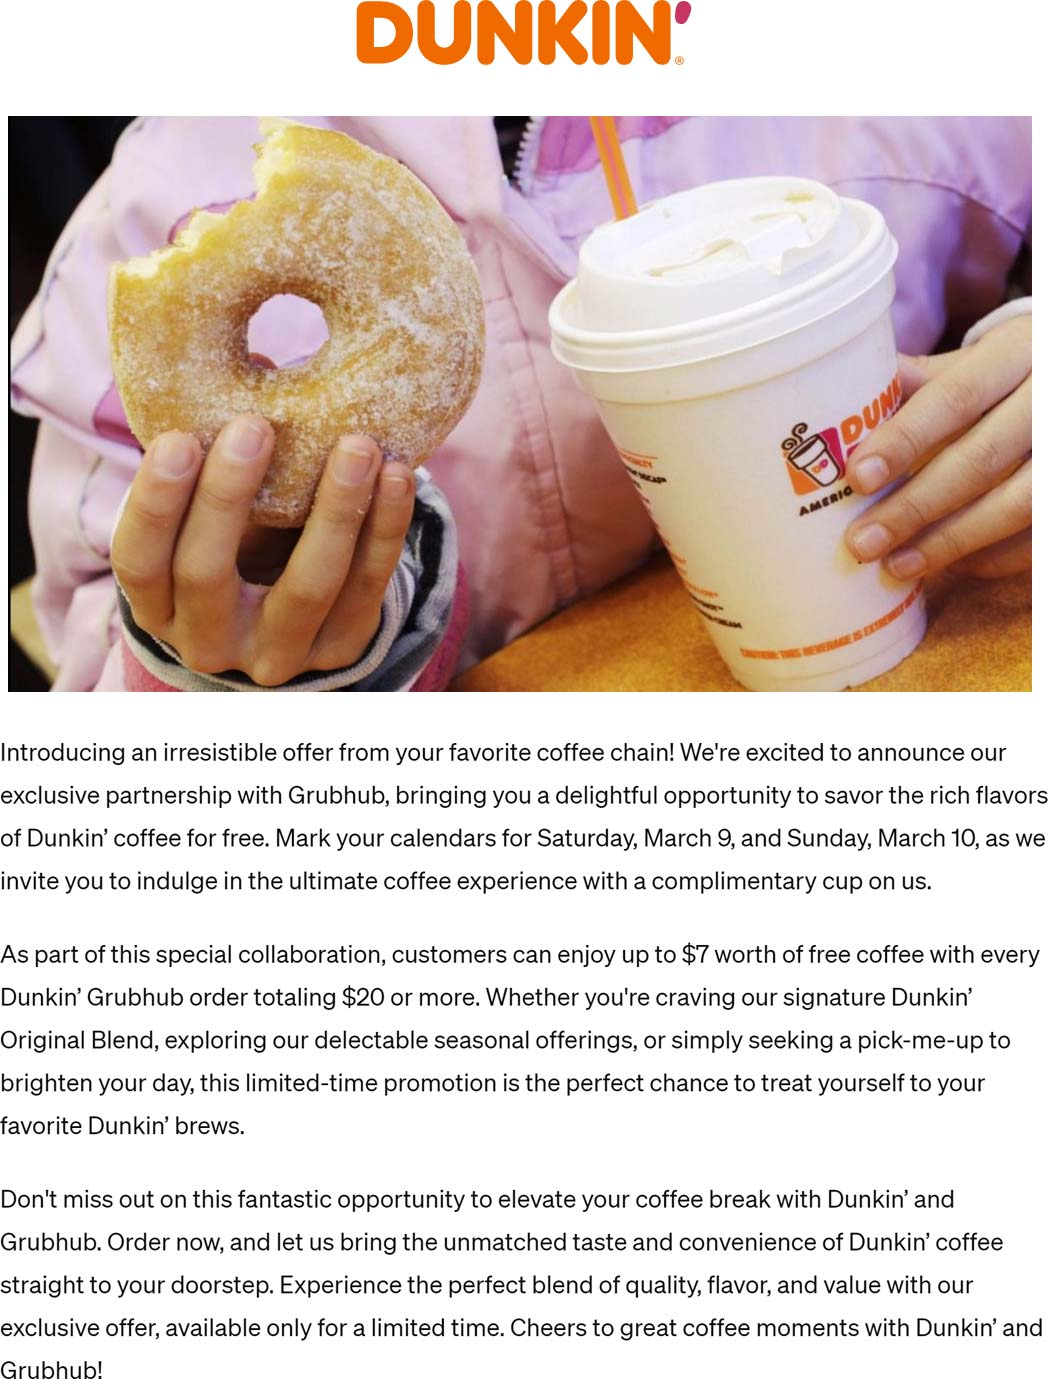 Dunkin restaurants Coupon  Free coffee on $20 delivery at Dunkin Donuts #dunkin 